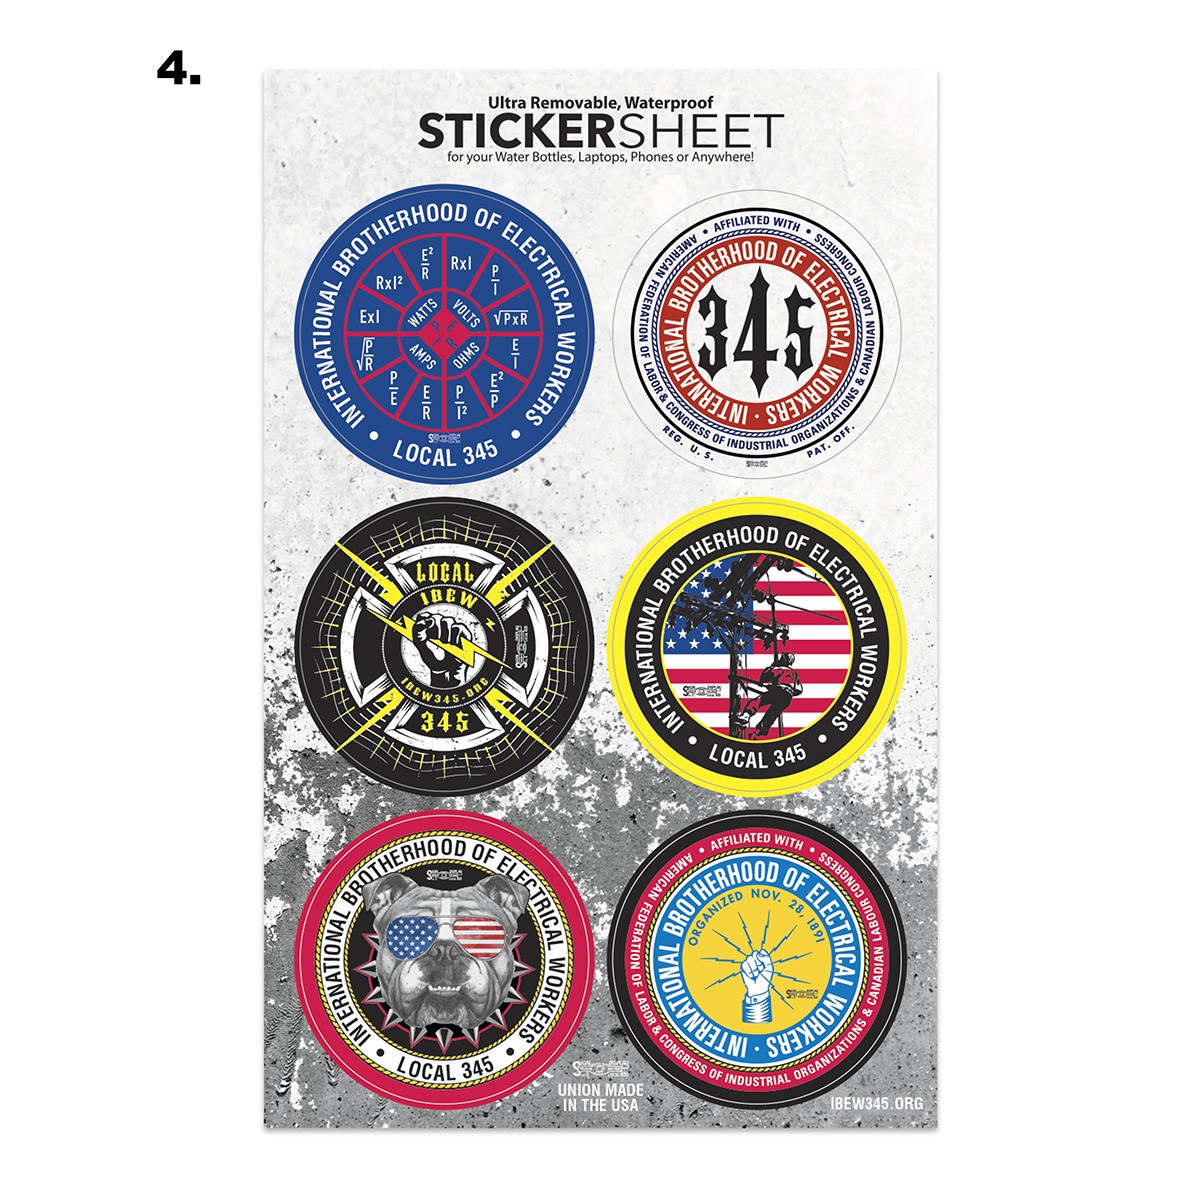 Decal Sticker Sheet | USA Made | Full Color | 7" x 11"